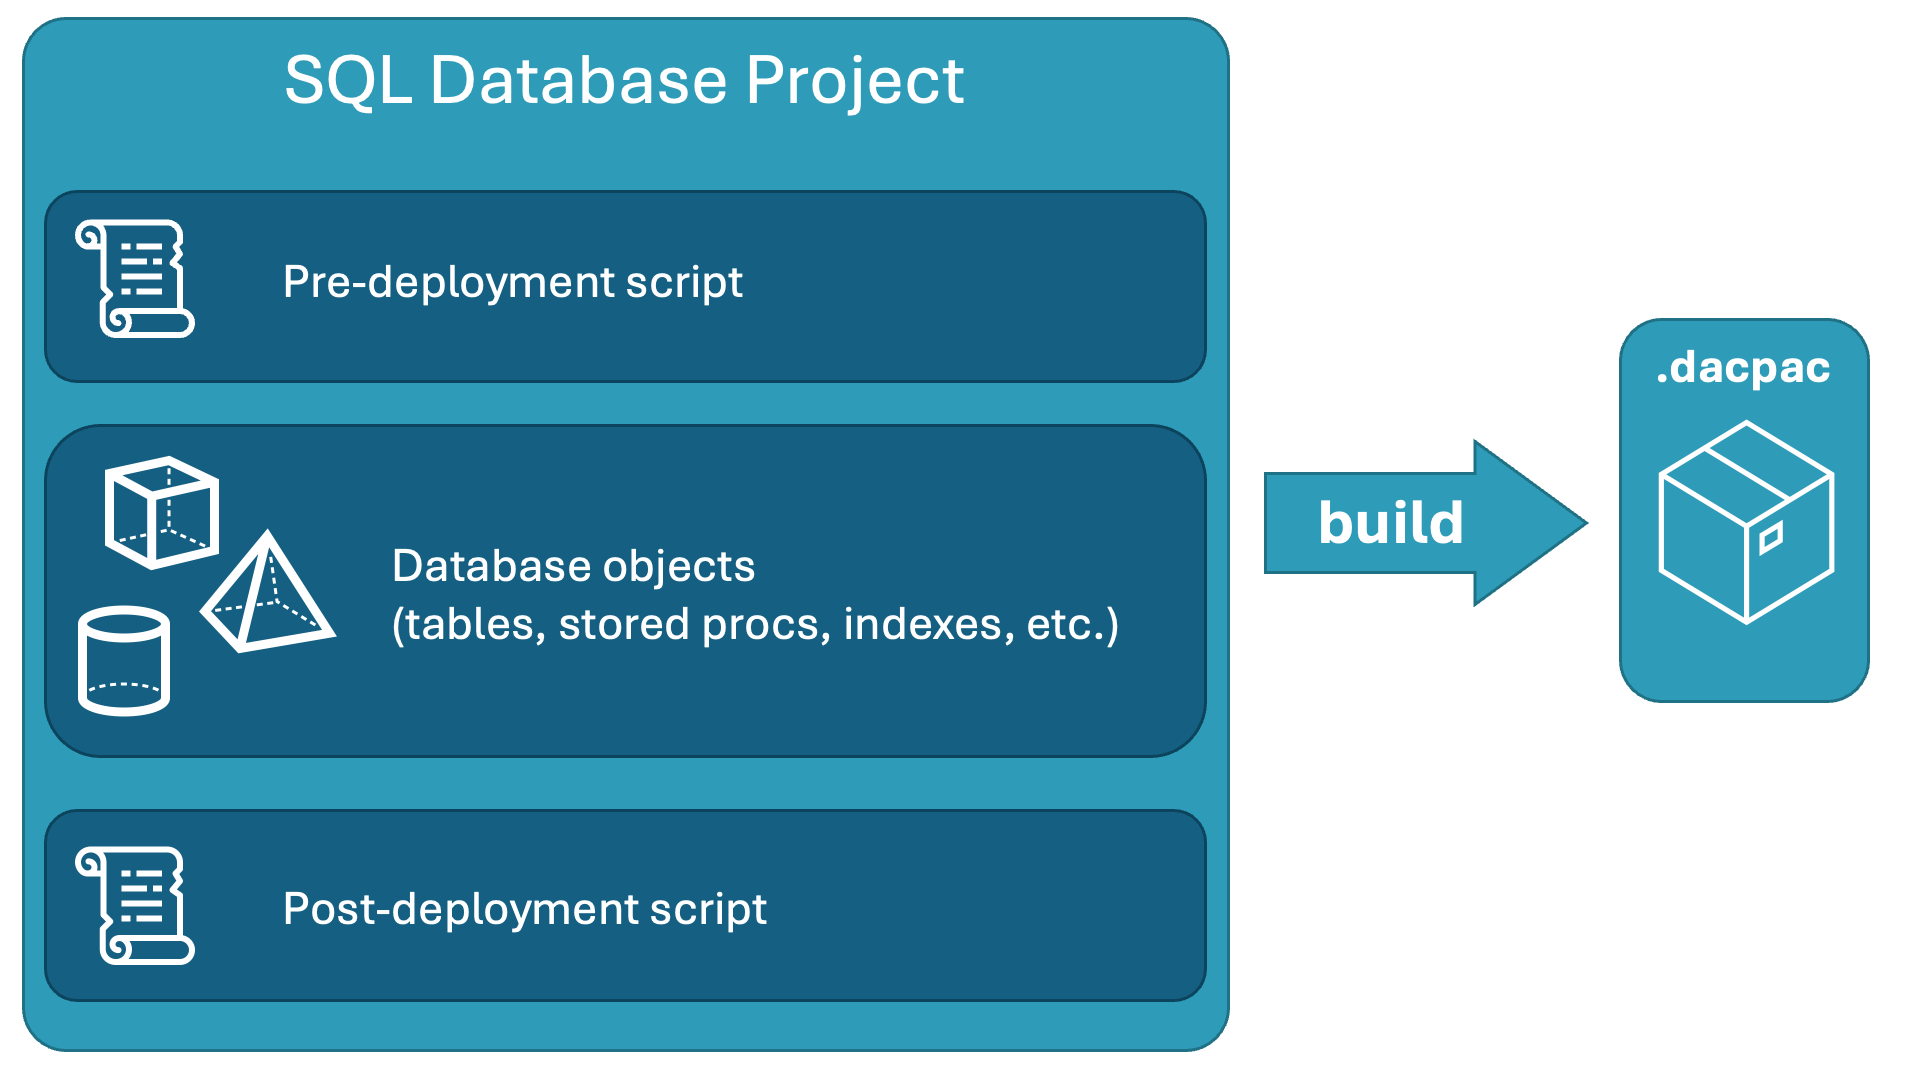 Summary of SQL Database Projects containing pre-deployment and post-deployment scripts as well as database objects.